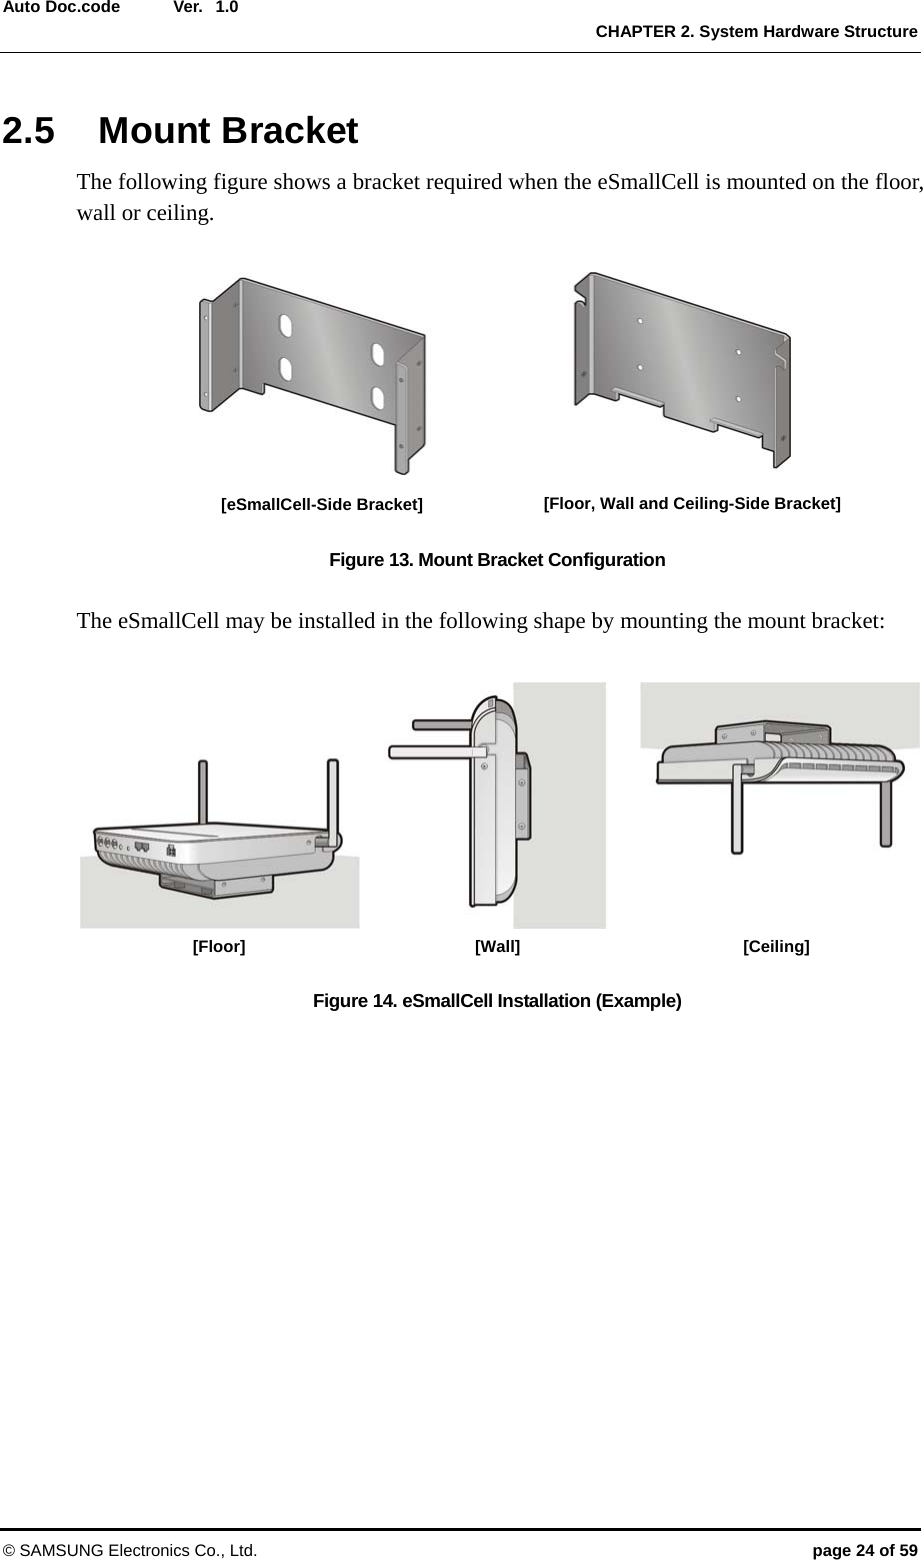  Ver.   CHAPTER 2. System Hardware Structure © SAMSUNG Electronics Co., Ltd.  page 24 of 59 Auto Doc.code  1.02.5 Mount Bracket The following figure shows a bracket required when the eSmallCell is mounted on the floor, wall or ceiling.  Figure 13. Mount Bracket Configuration    The eSmallCell may be installed in the following shape by mounting the mount bracket:    Figure 14. eSmallCell Installation (Example)  [Floor, Wall and Ceiling-Side Bracket] [eSmallCell-Side Bracket] [Floor] [Wall] [Ceiling] 